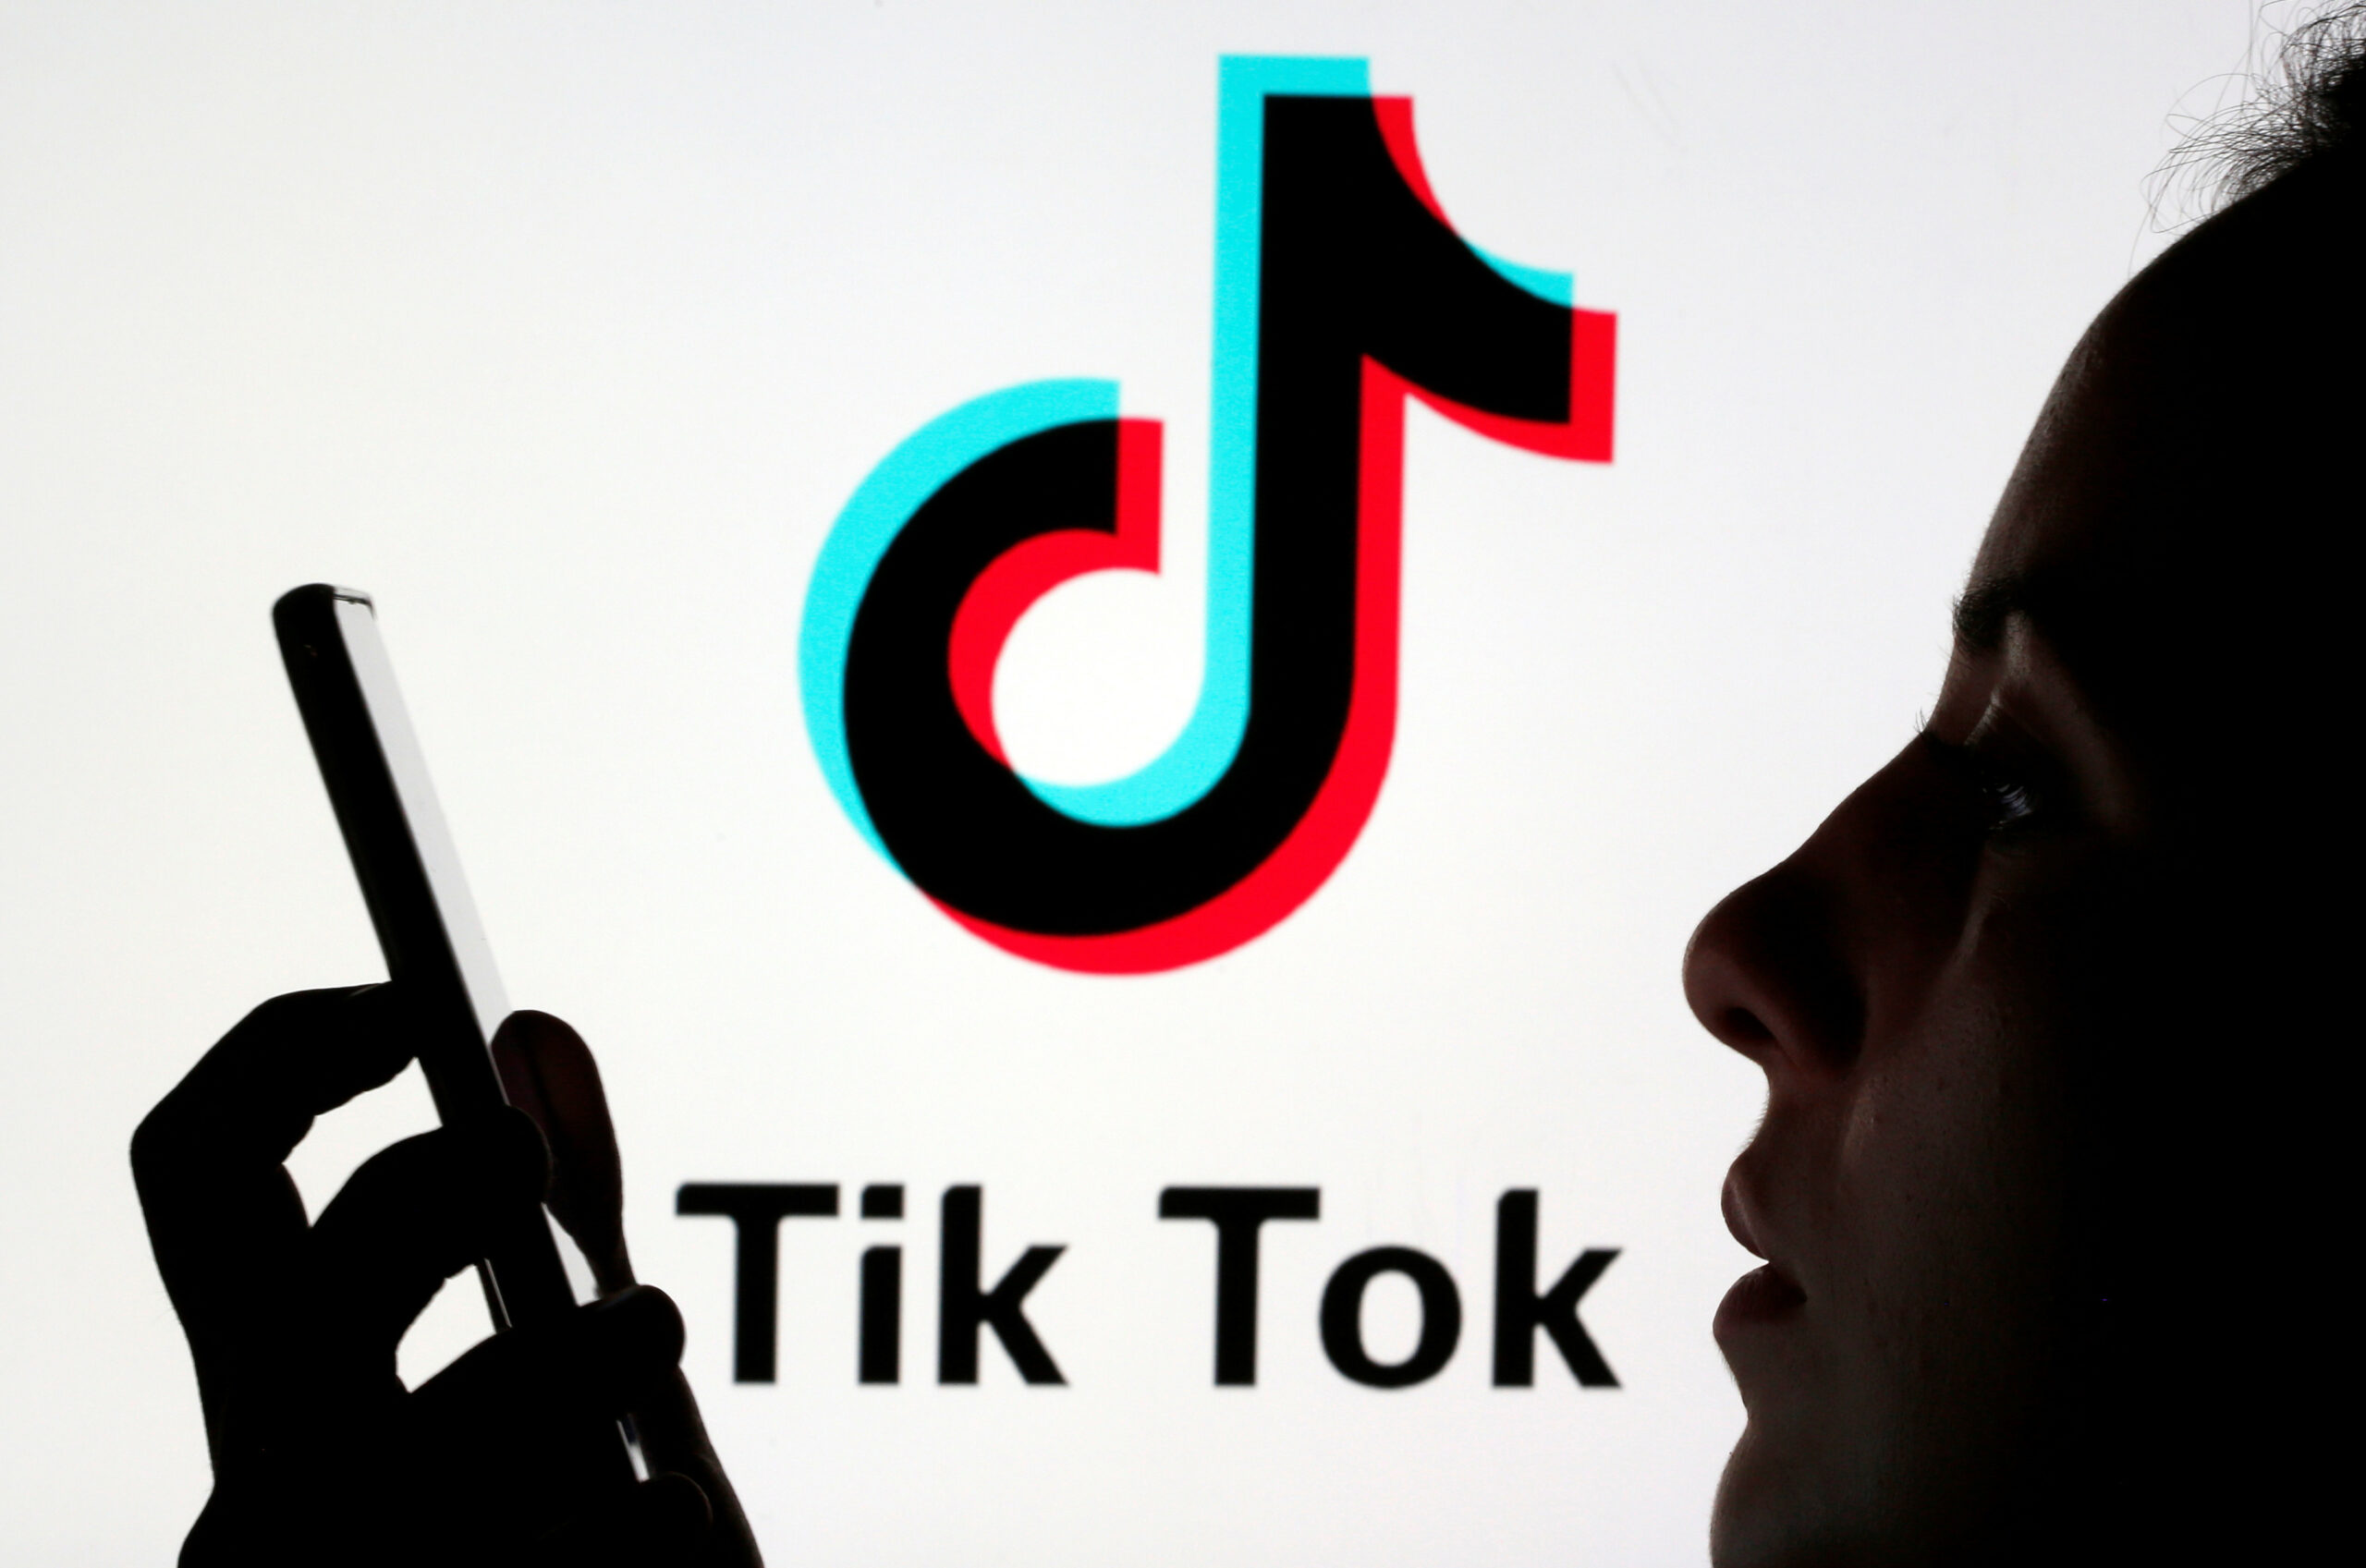 "The Science of Viral TikTok Videos: What Makes Them So Addictive"